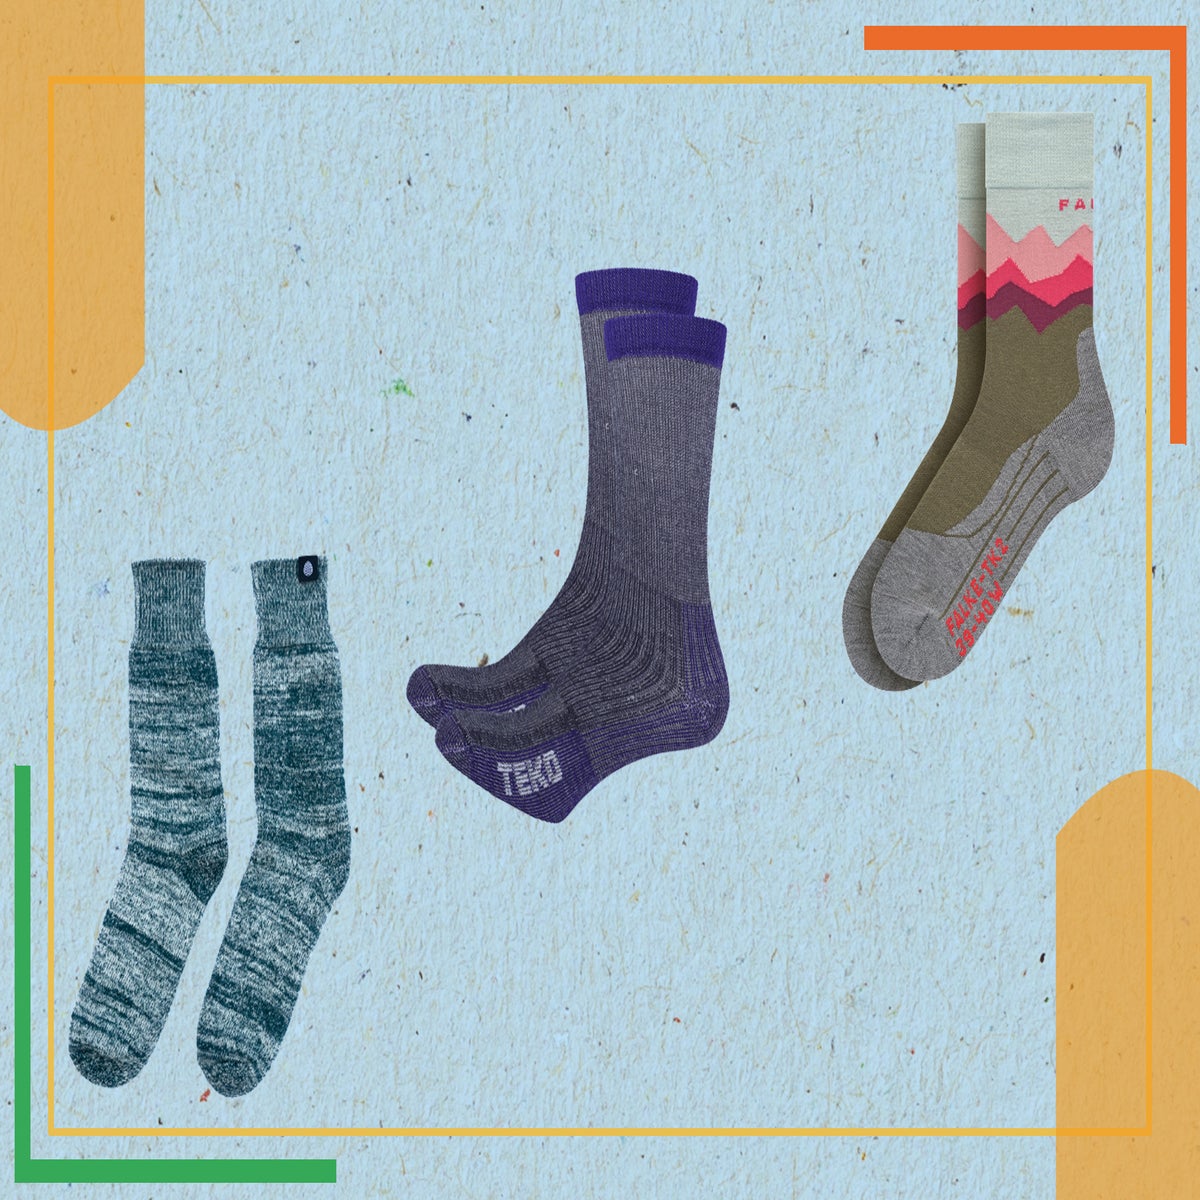 Best walking socks: Cushioned and knee-high styles for hiking